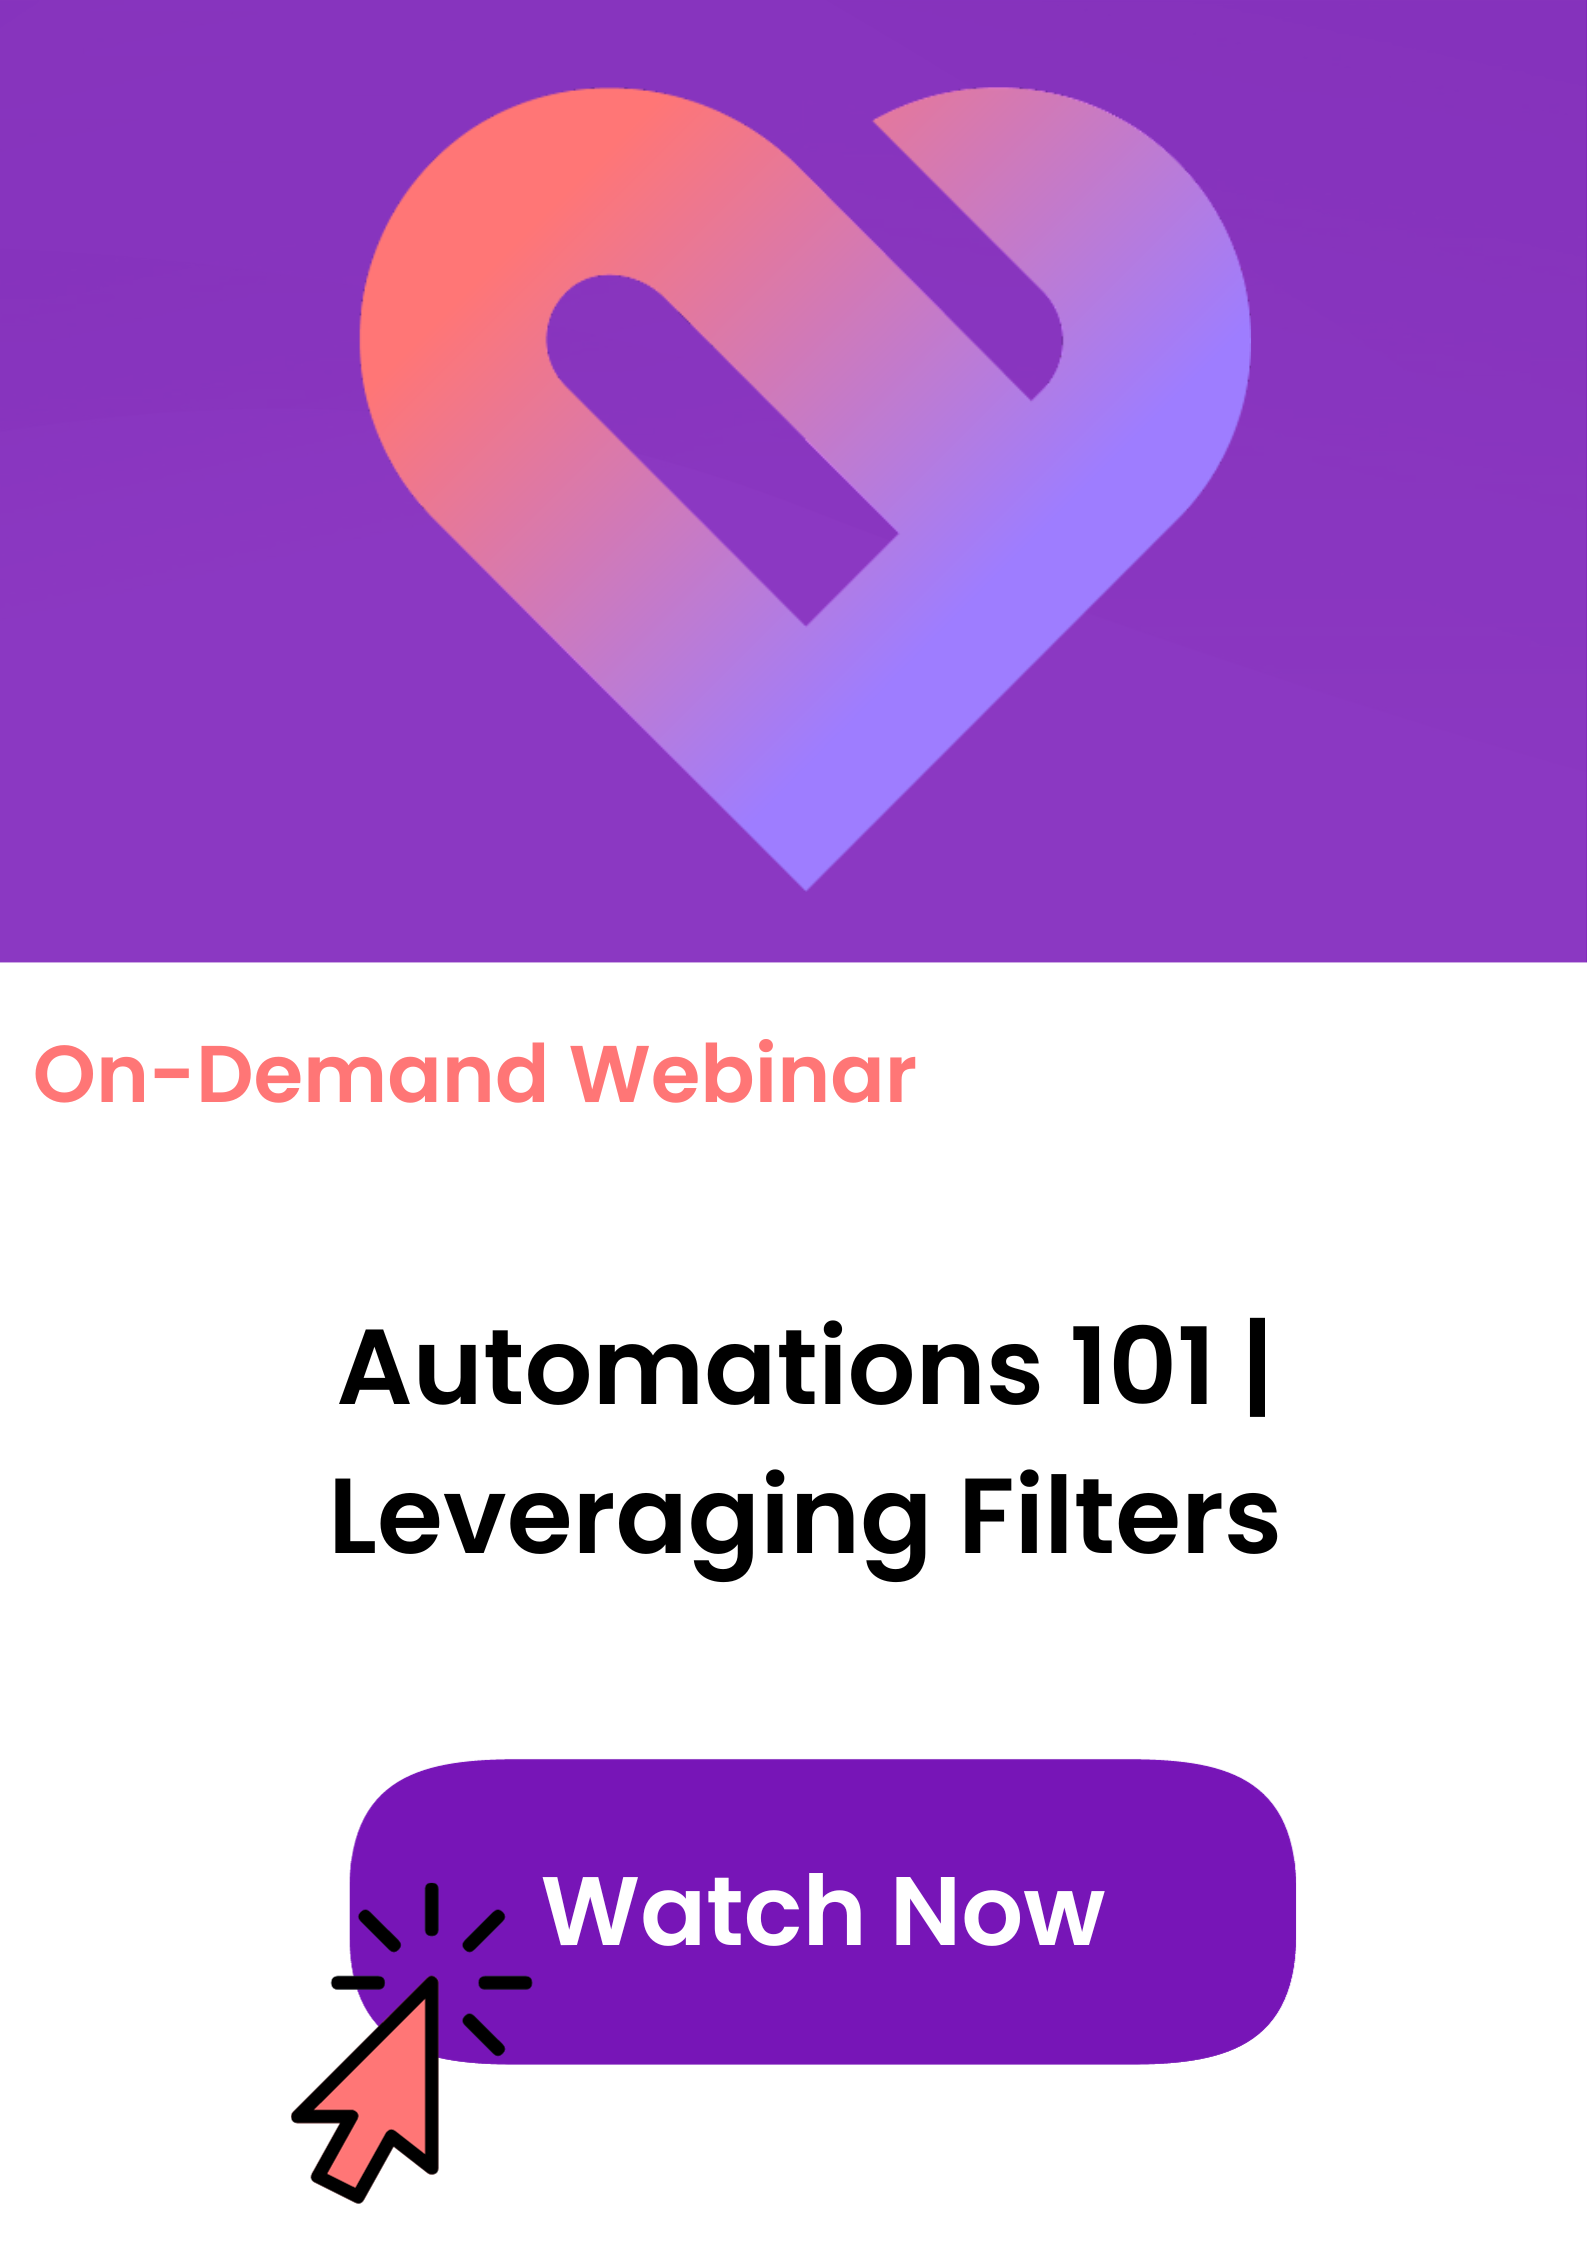 On-demand webinar tile for Automations 101 Leveraging Filters, click to watch now